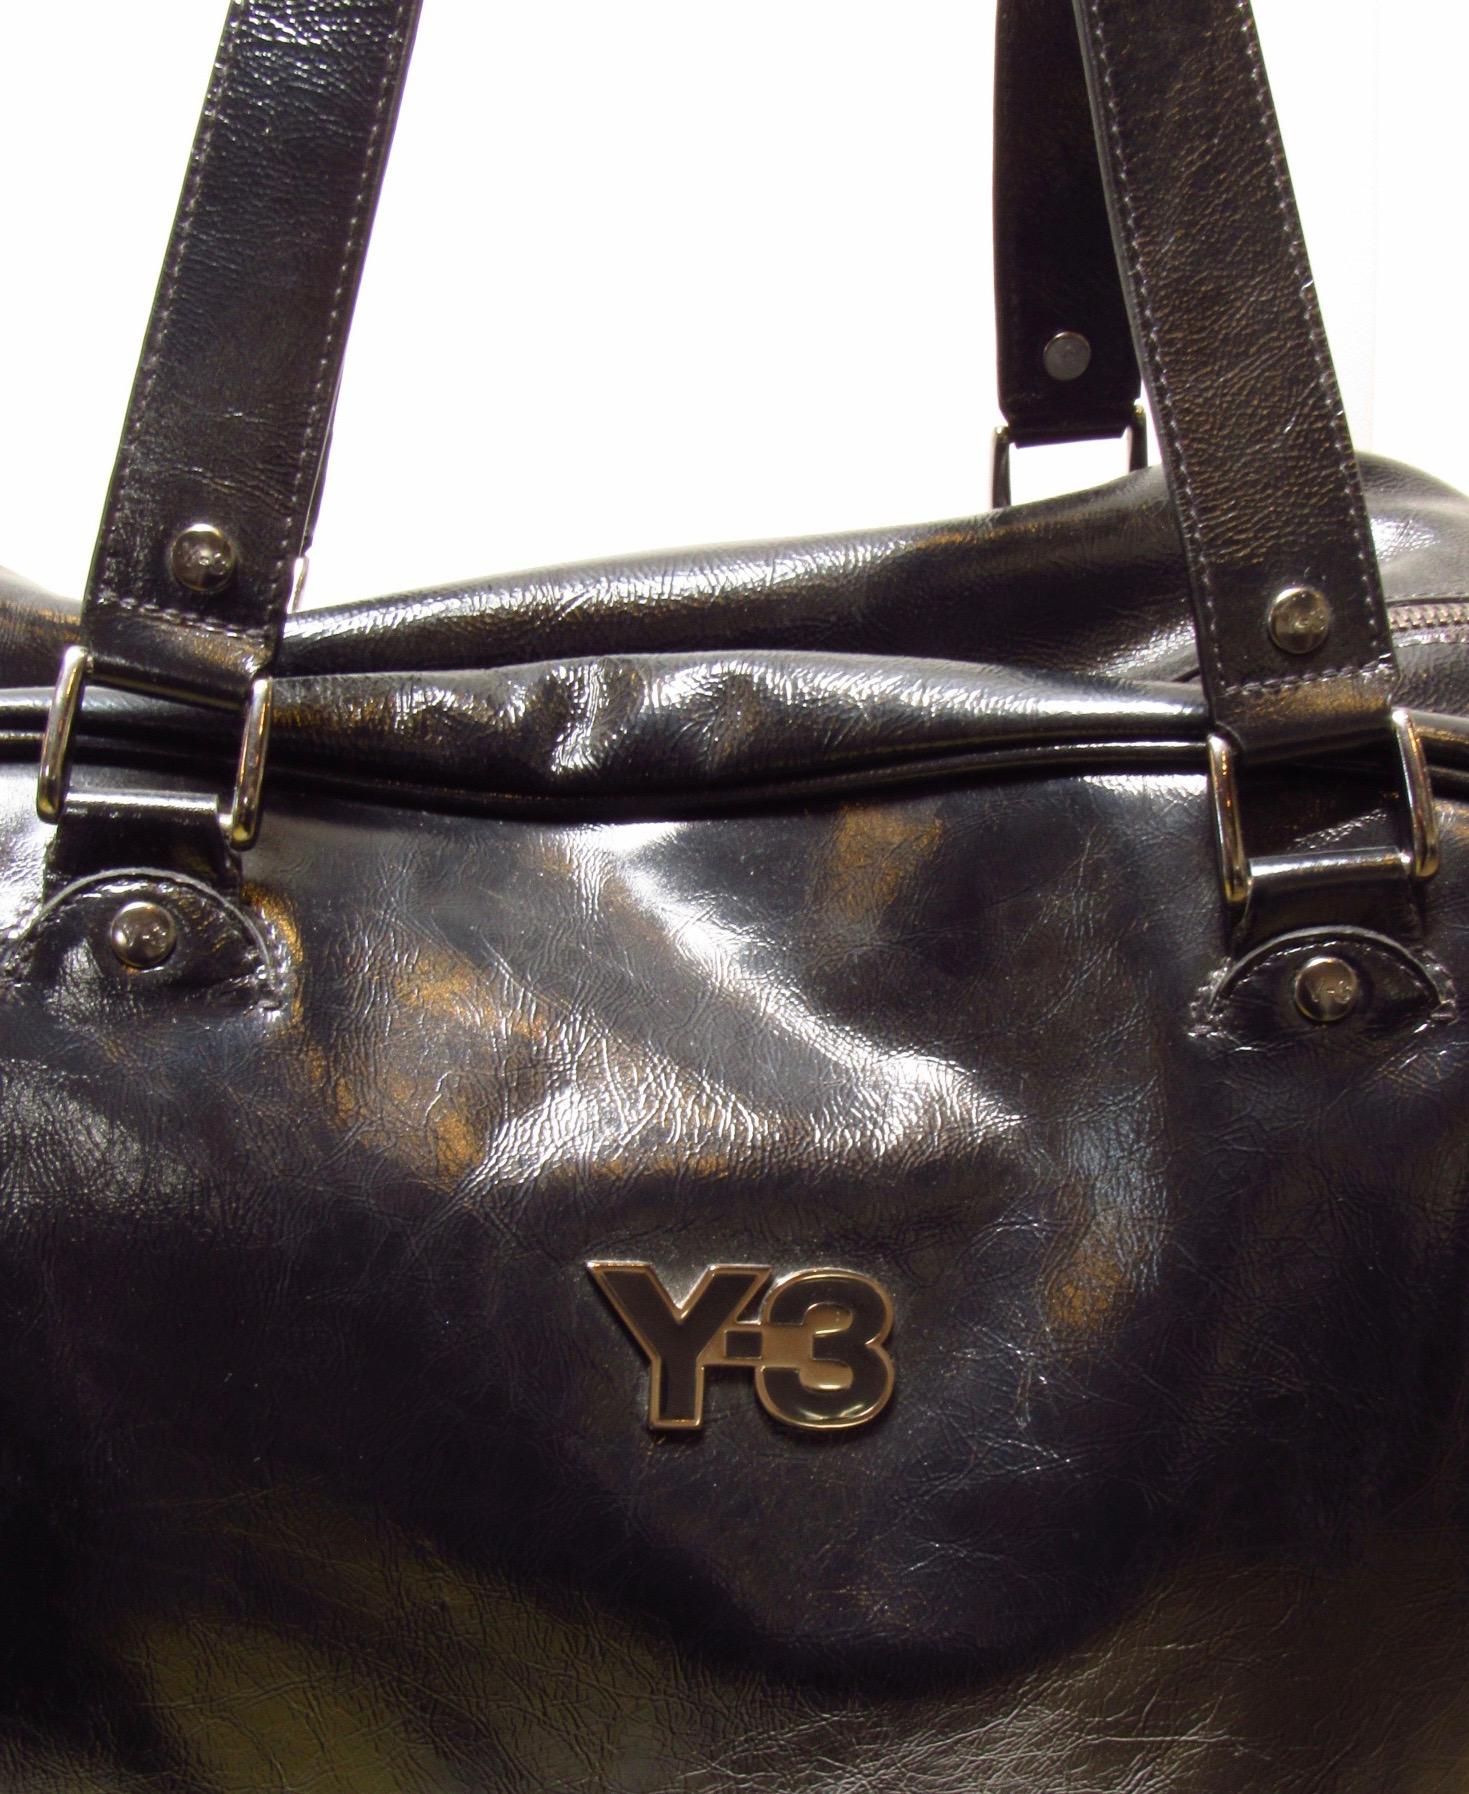 This sporty vintage black patent leather retro bowling bag features woven mocha brown panels, double zippers for ease of access, a discrete side pocket, and the Y-3 logo. The inside provides three slot pockets and one zippered pocket. 